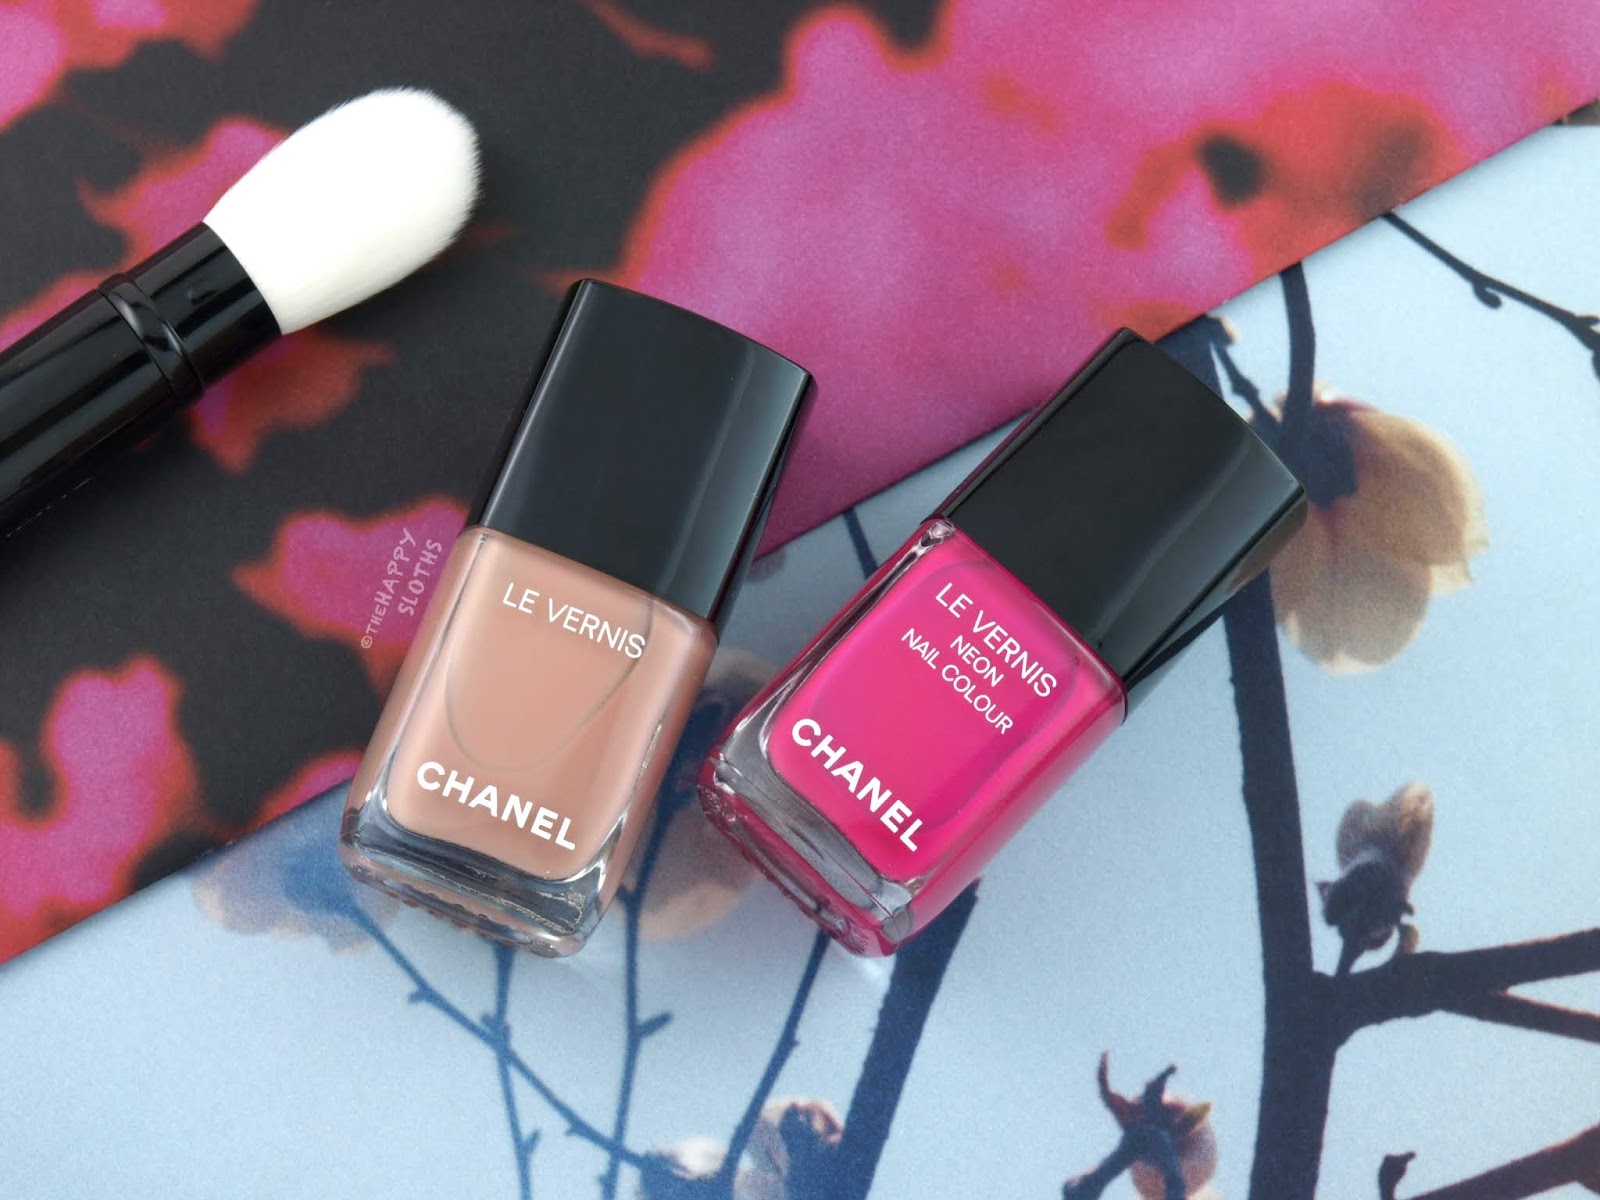 Chanel Spring-Summer 2018 | Le Vernis Nail Polish: Review and Swatches